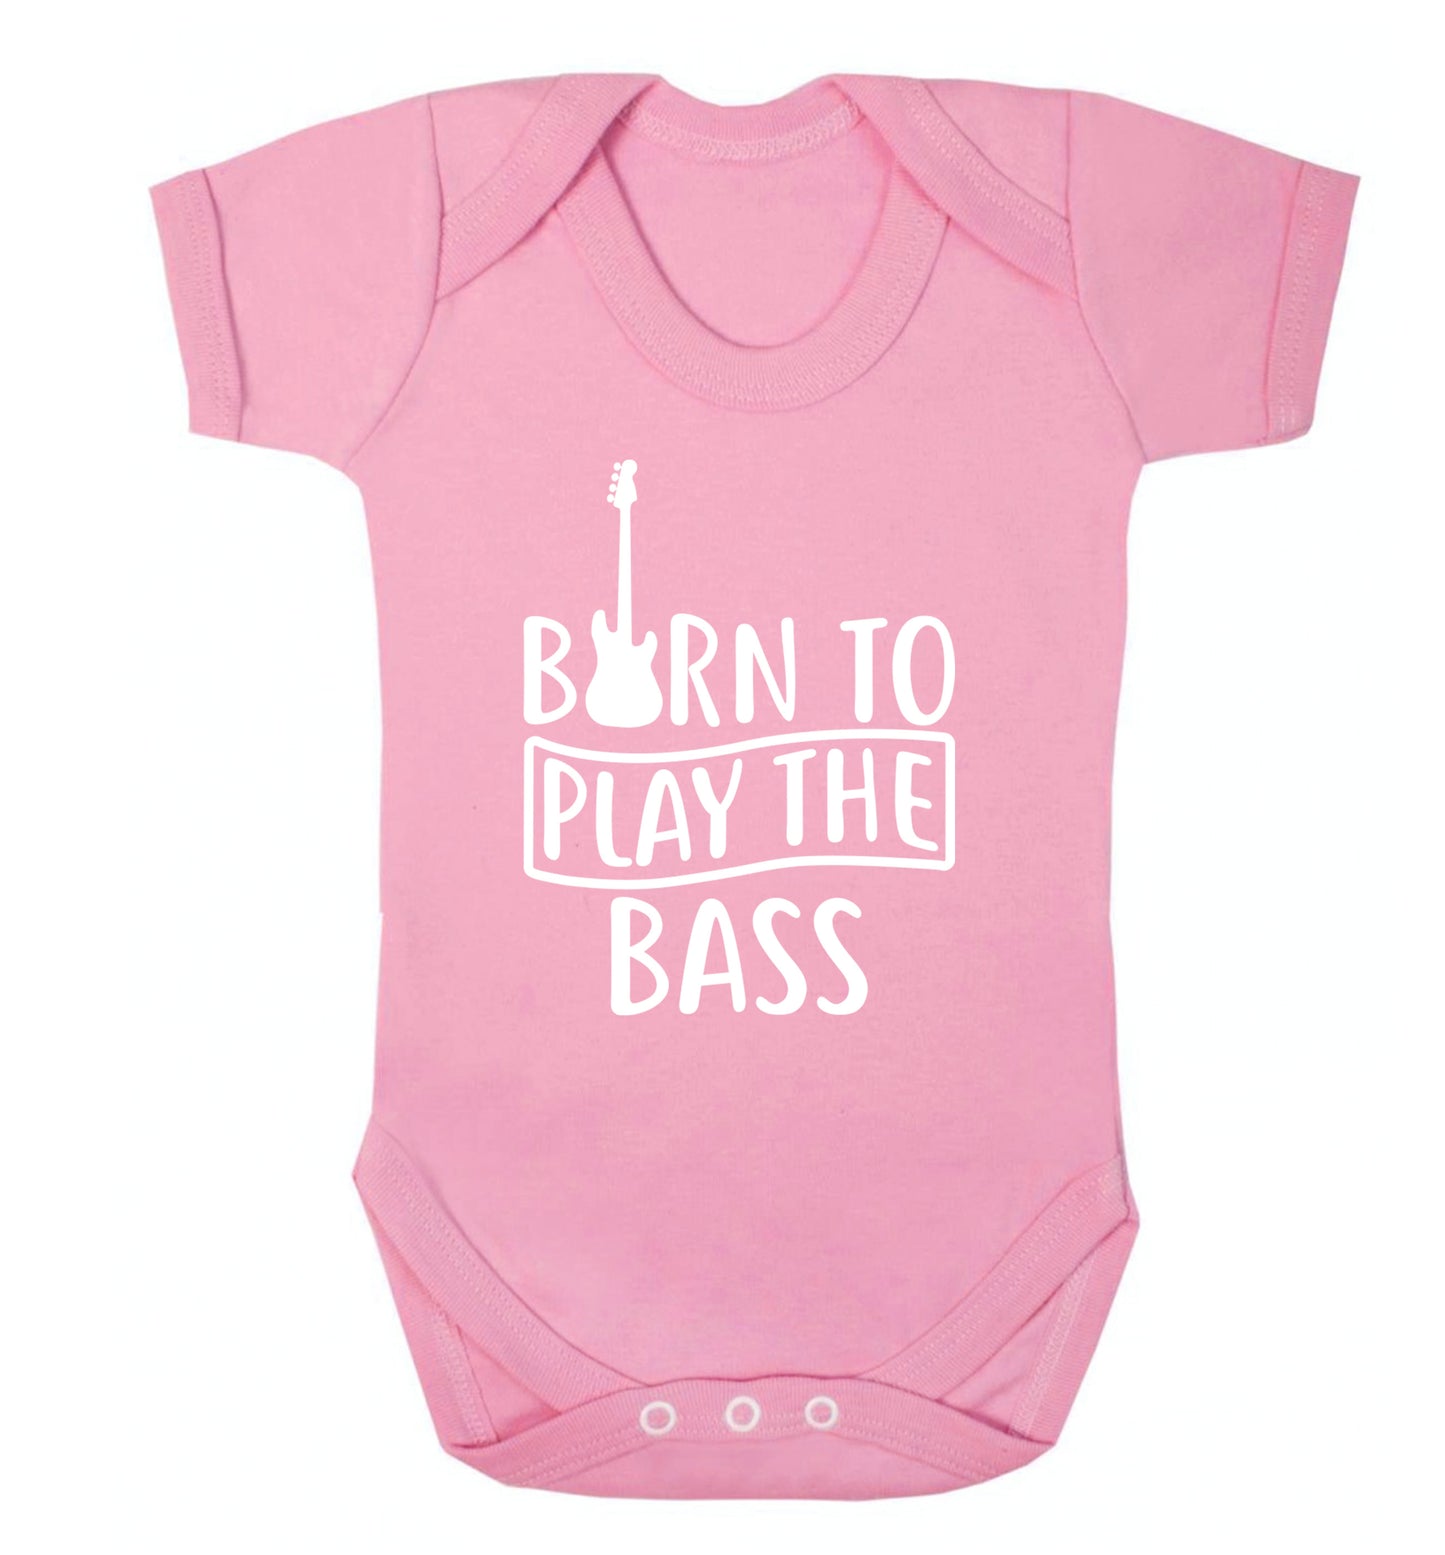 Born to play the bass Baby Vest pale pink 18-24 months